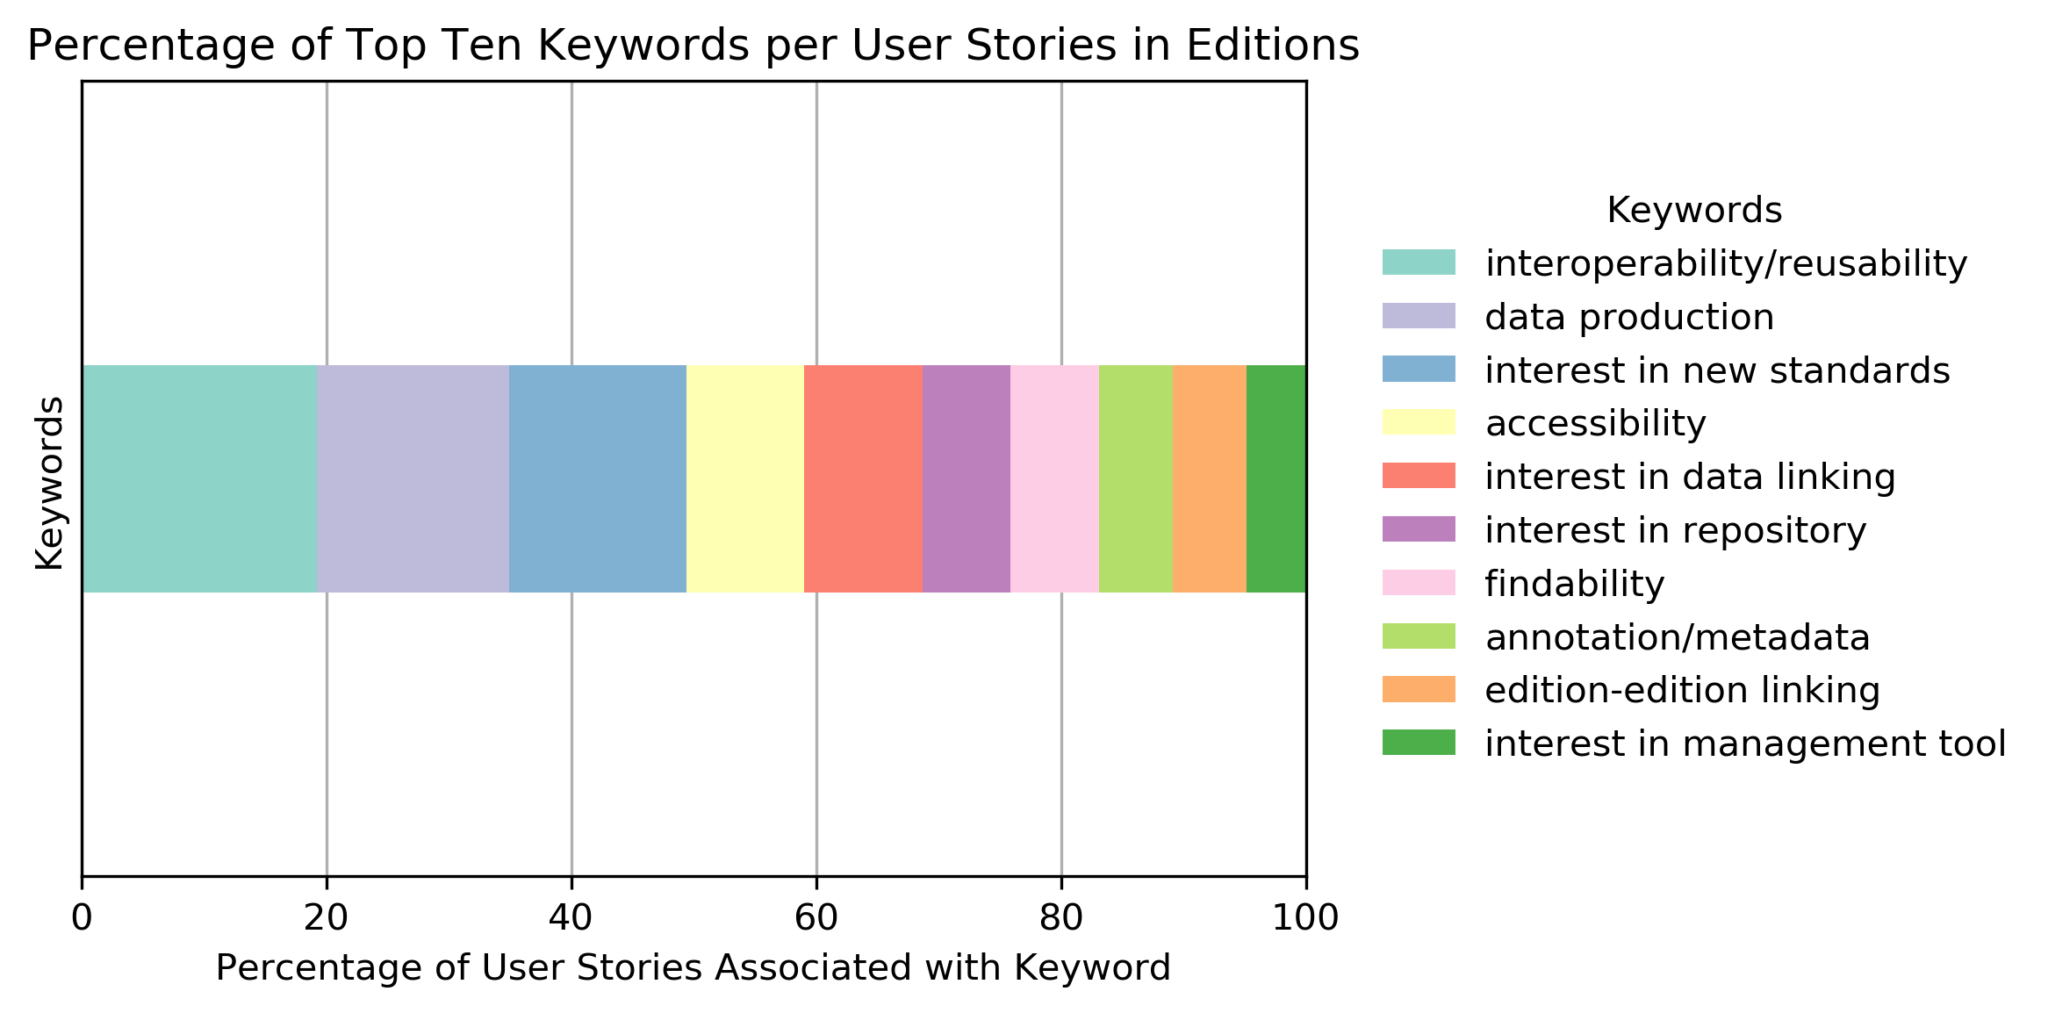 Percentage of User Stories in Editions for the 10 most-used keywords